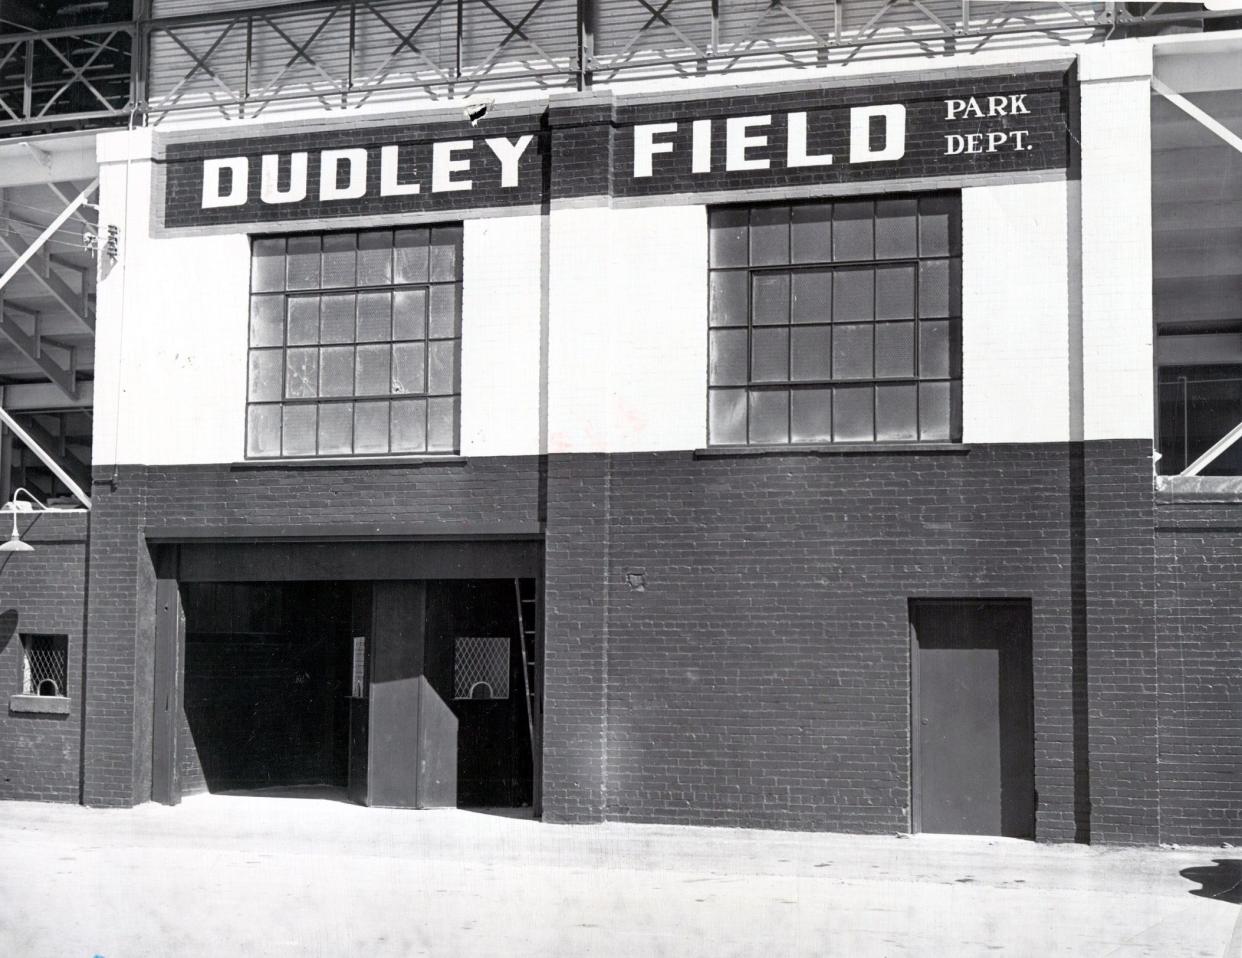 March 22, 1953 - NEW ENTRANCE -- From this central entranceway, spectators go to either right or left, passing restrooms and concession stands, to reach their seats in hte stands, boxes or bleachers. The small window at left is the drive-in ticket window for fans who wish to purchase tickets in advance.